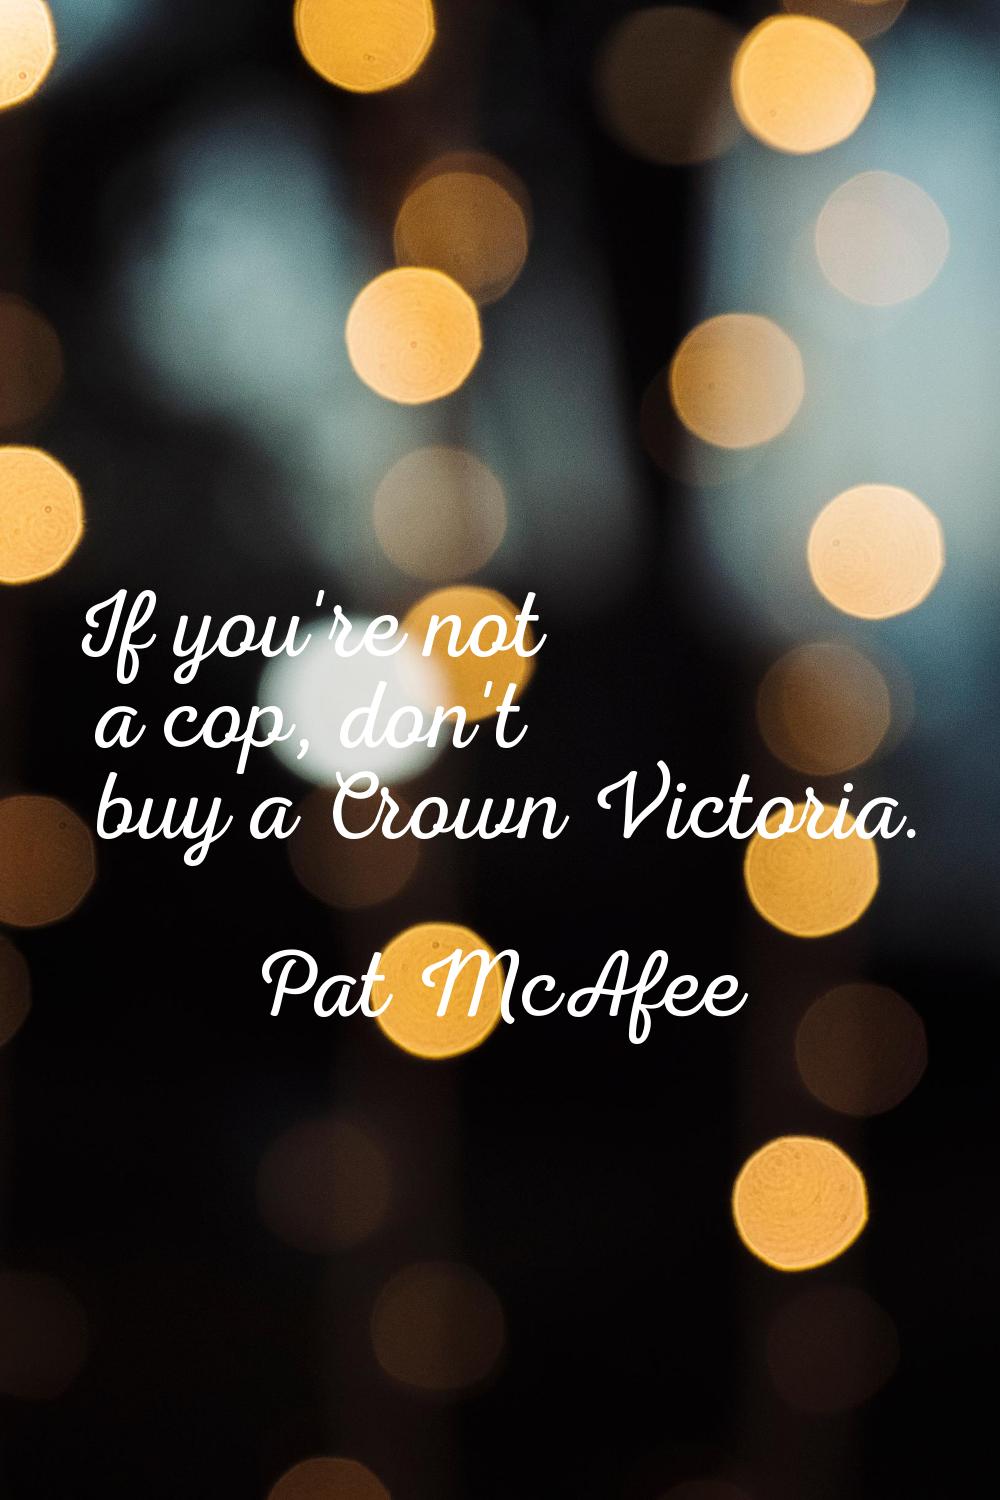 If you're not a cop, don't buy a Crown Victoria.